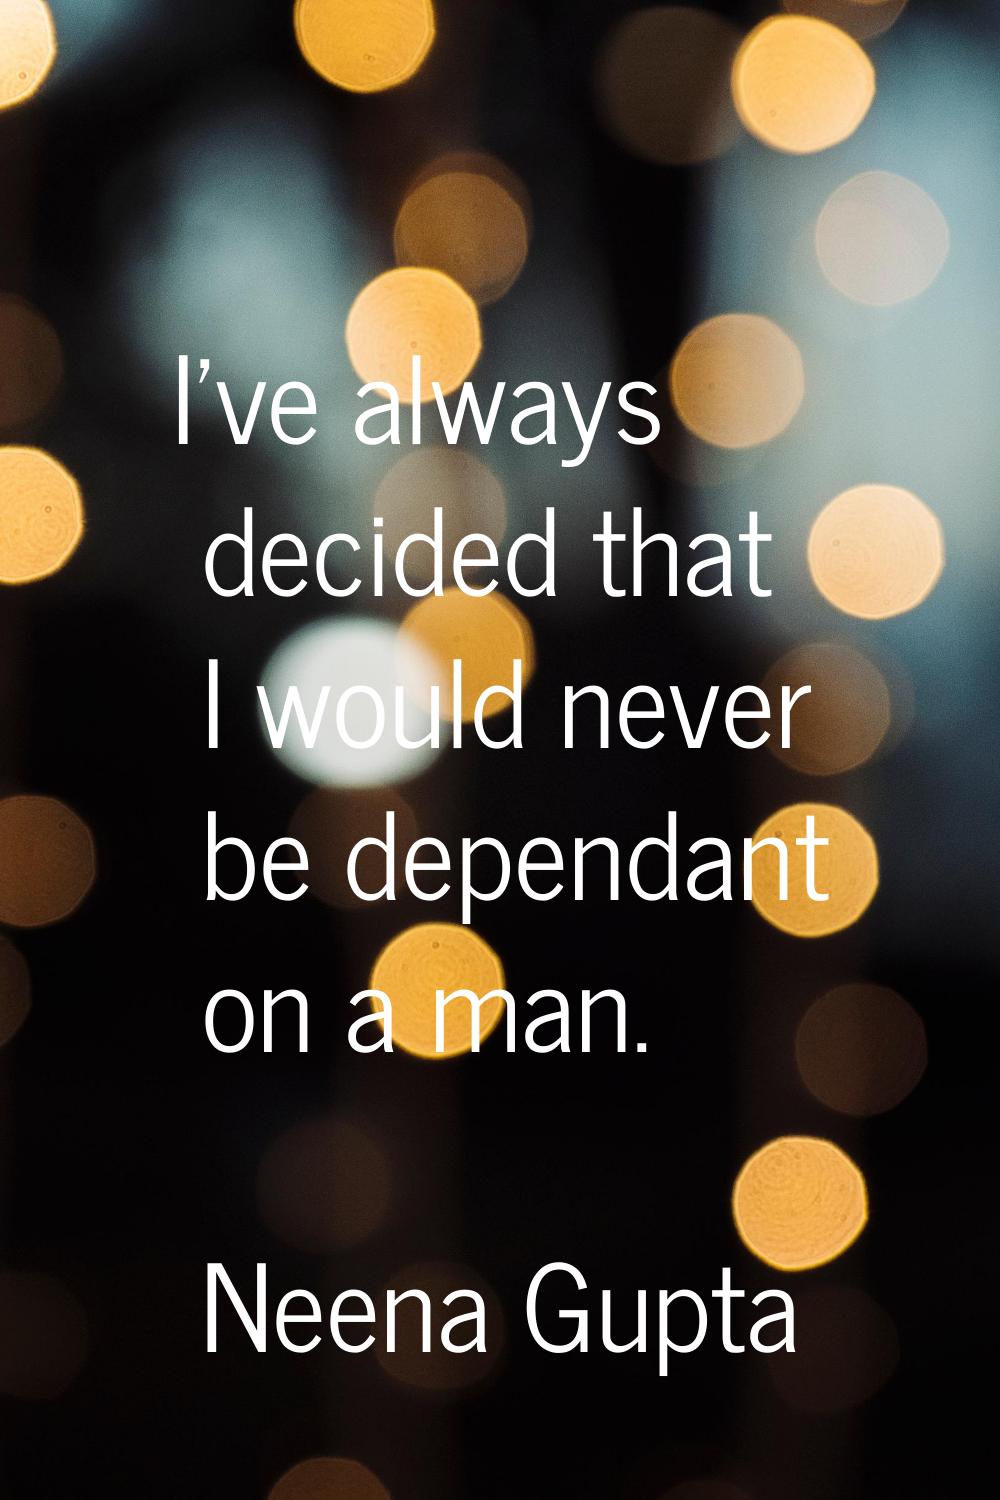 I've always decided that I would never be dependant on a man.